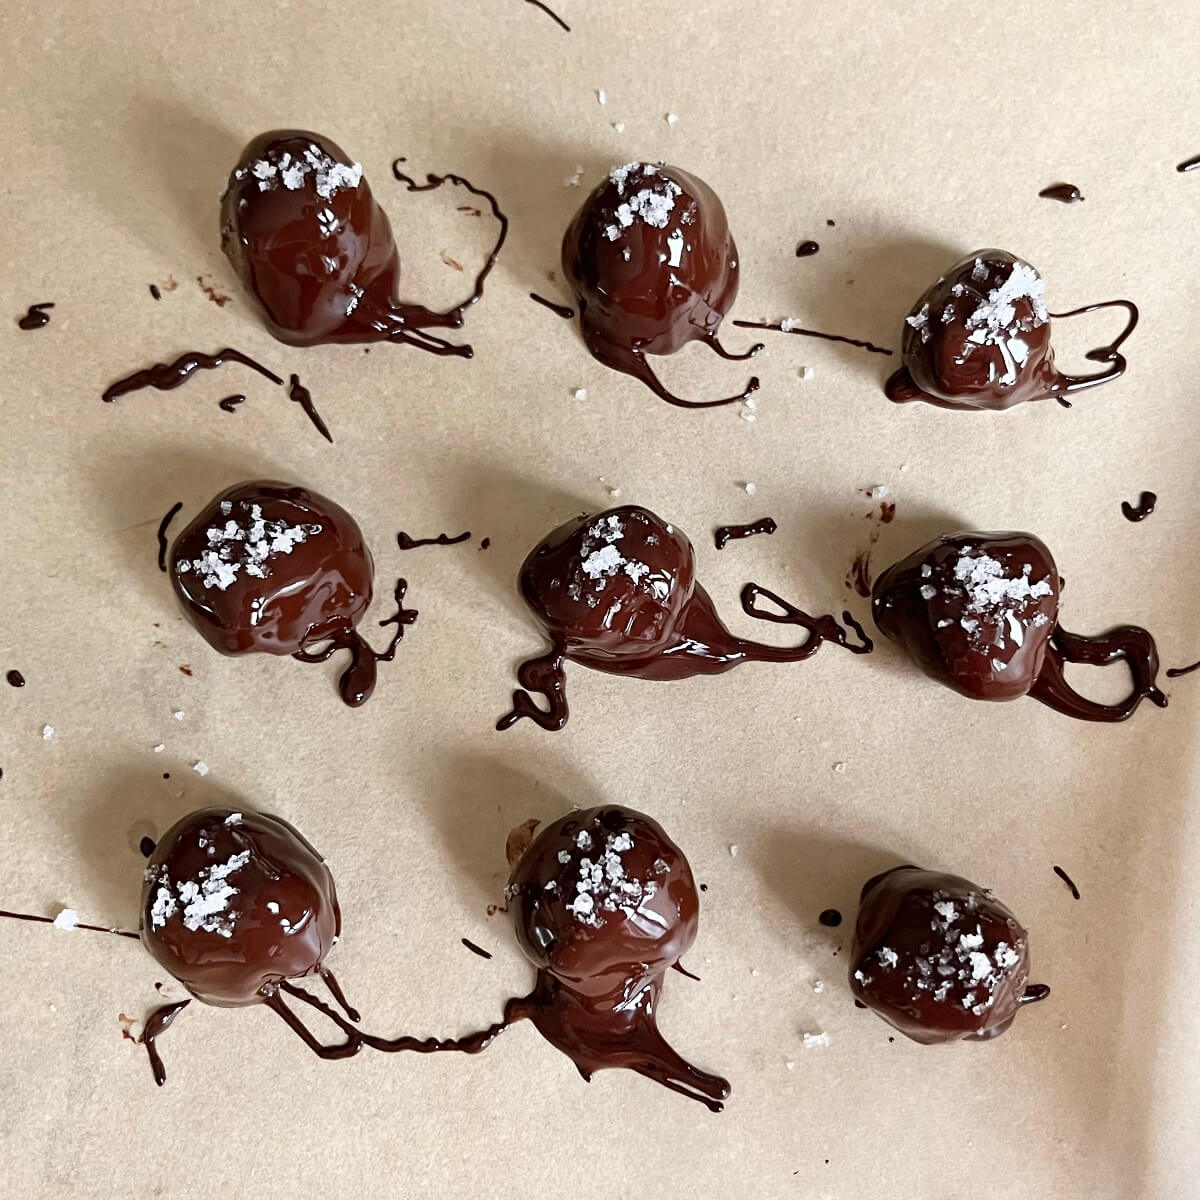 Chocolate truffles drying on a piece of parchment paper.